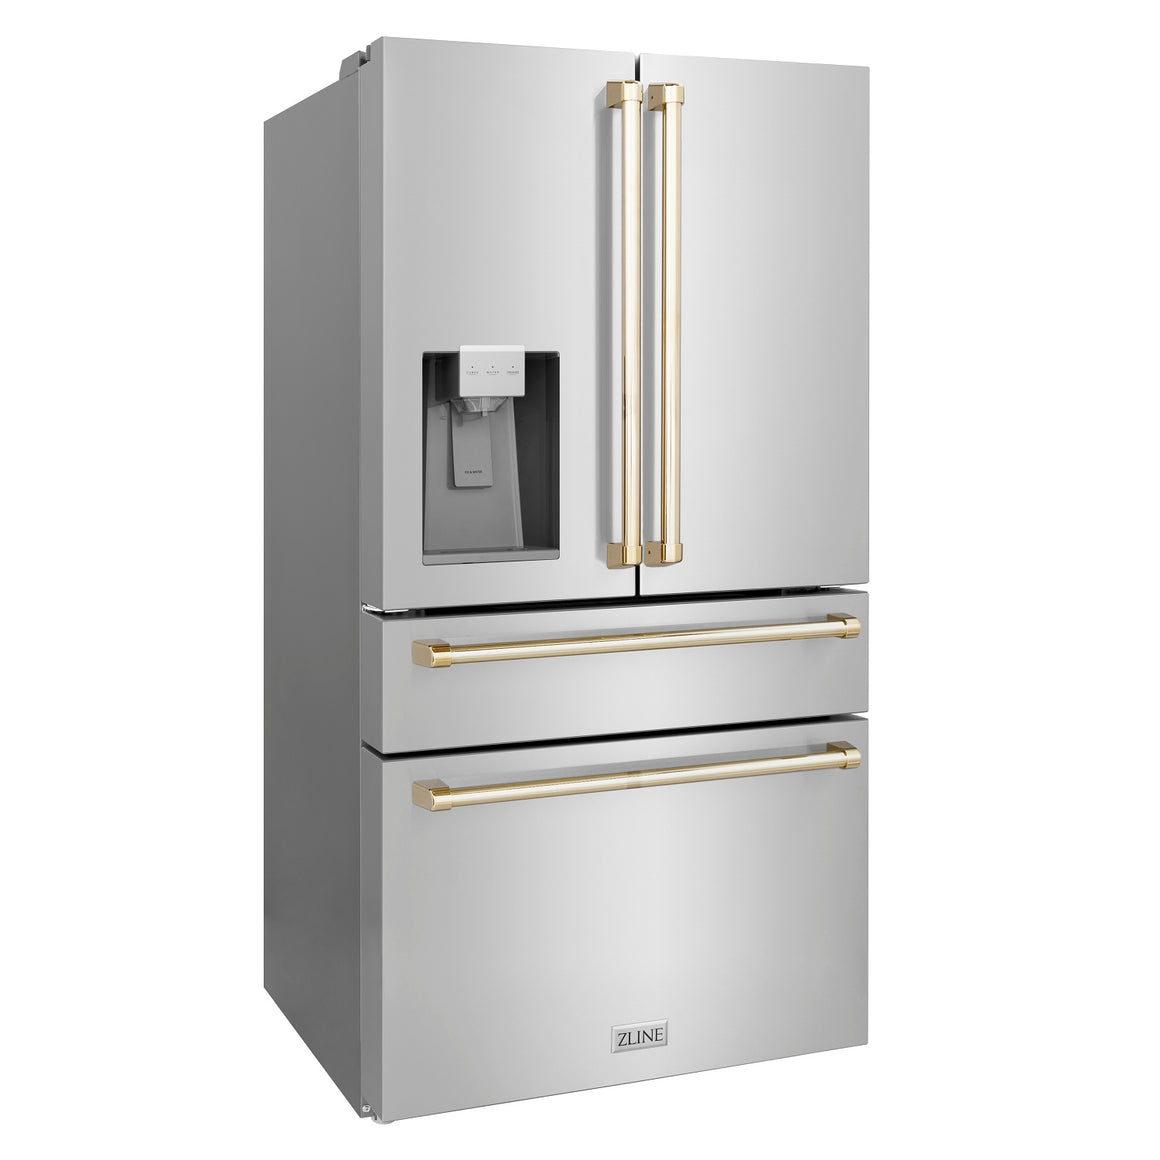 ZLINE 36" Autograph Edition 21.6 cu. ft French Door Refrigerator with Water and Ice Dispenser in Fingerprint Resistant Stainless Steel with Gold Accents